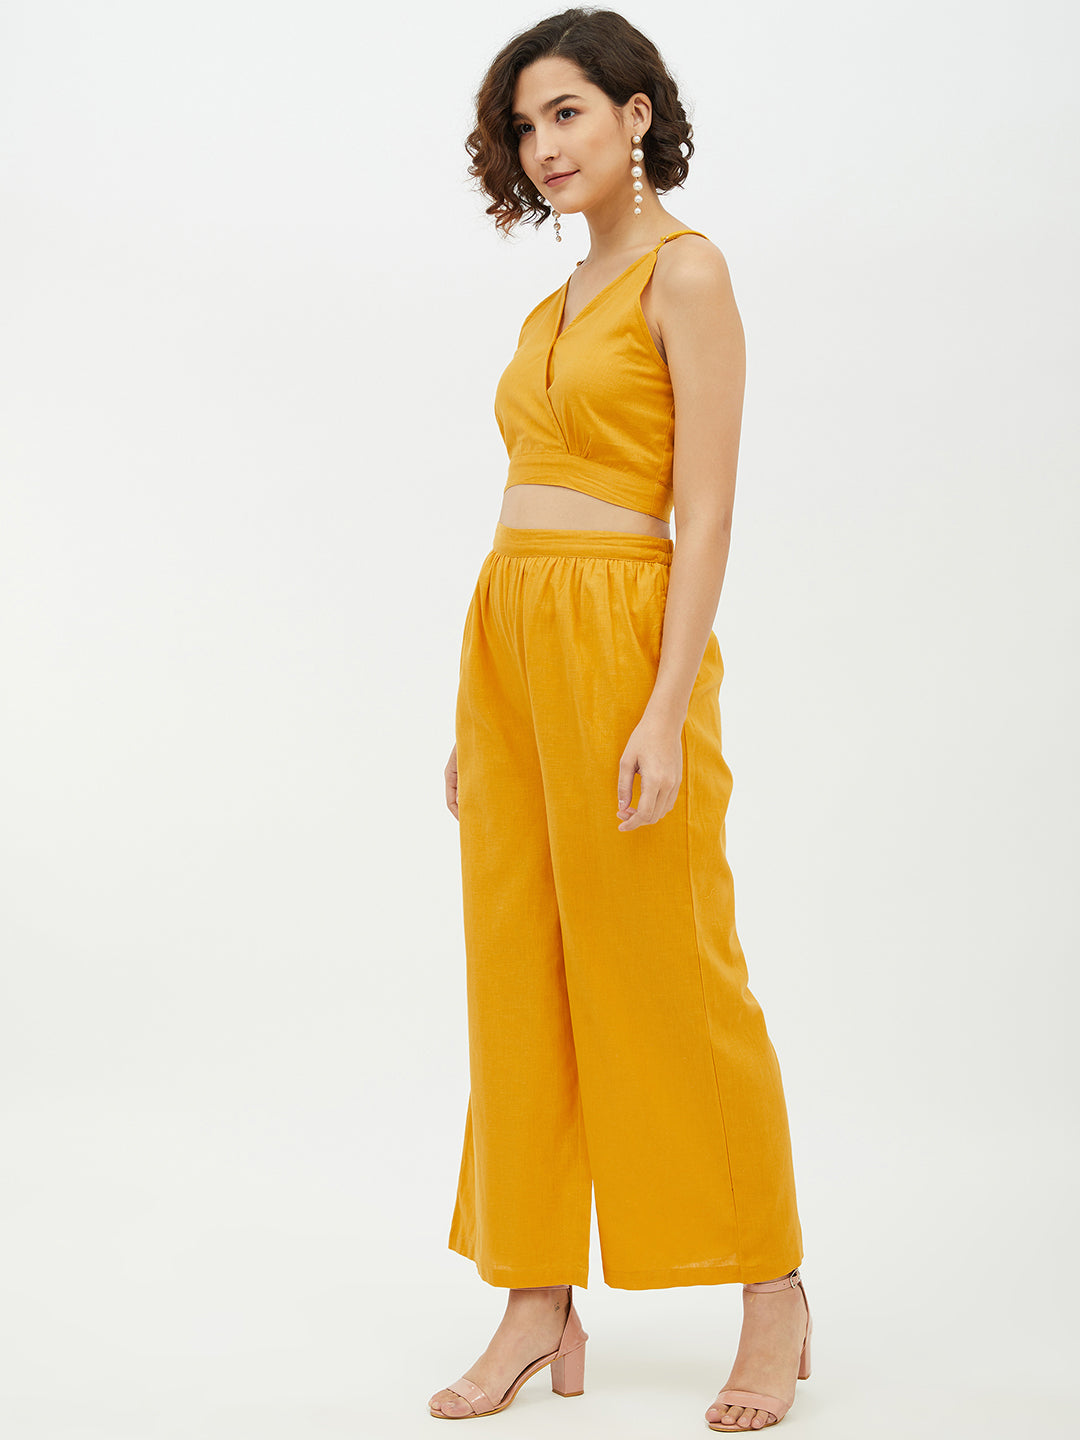 Women's Cotton Linen Yellow Crop Top and Palazzo set